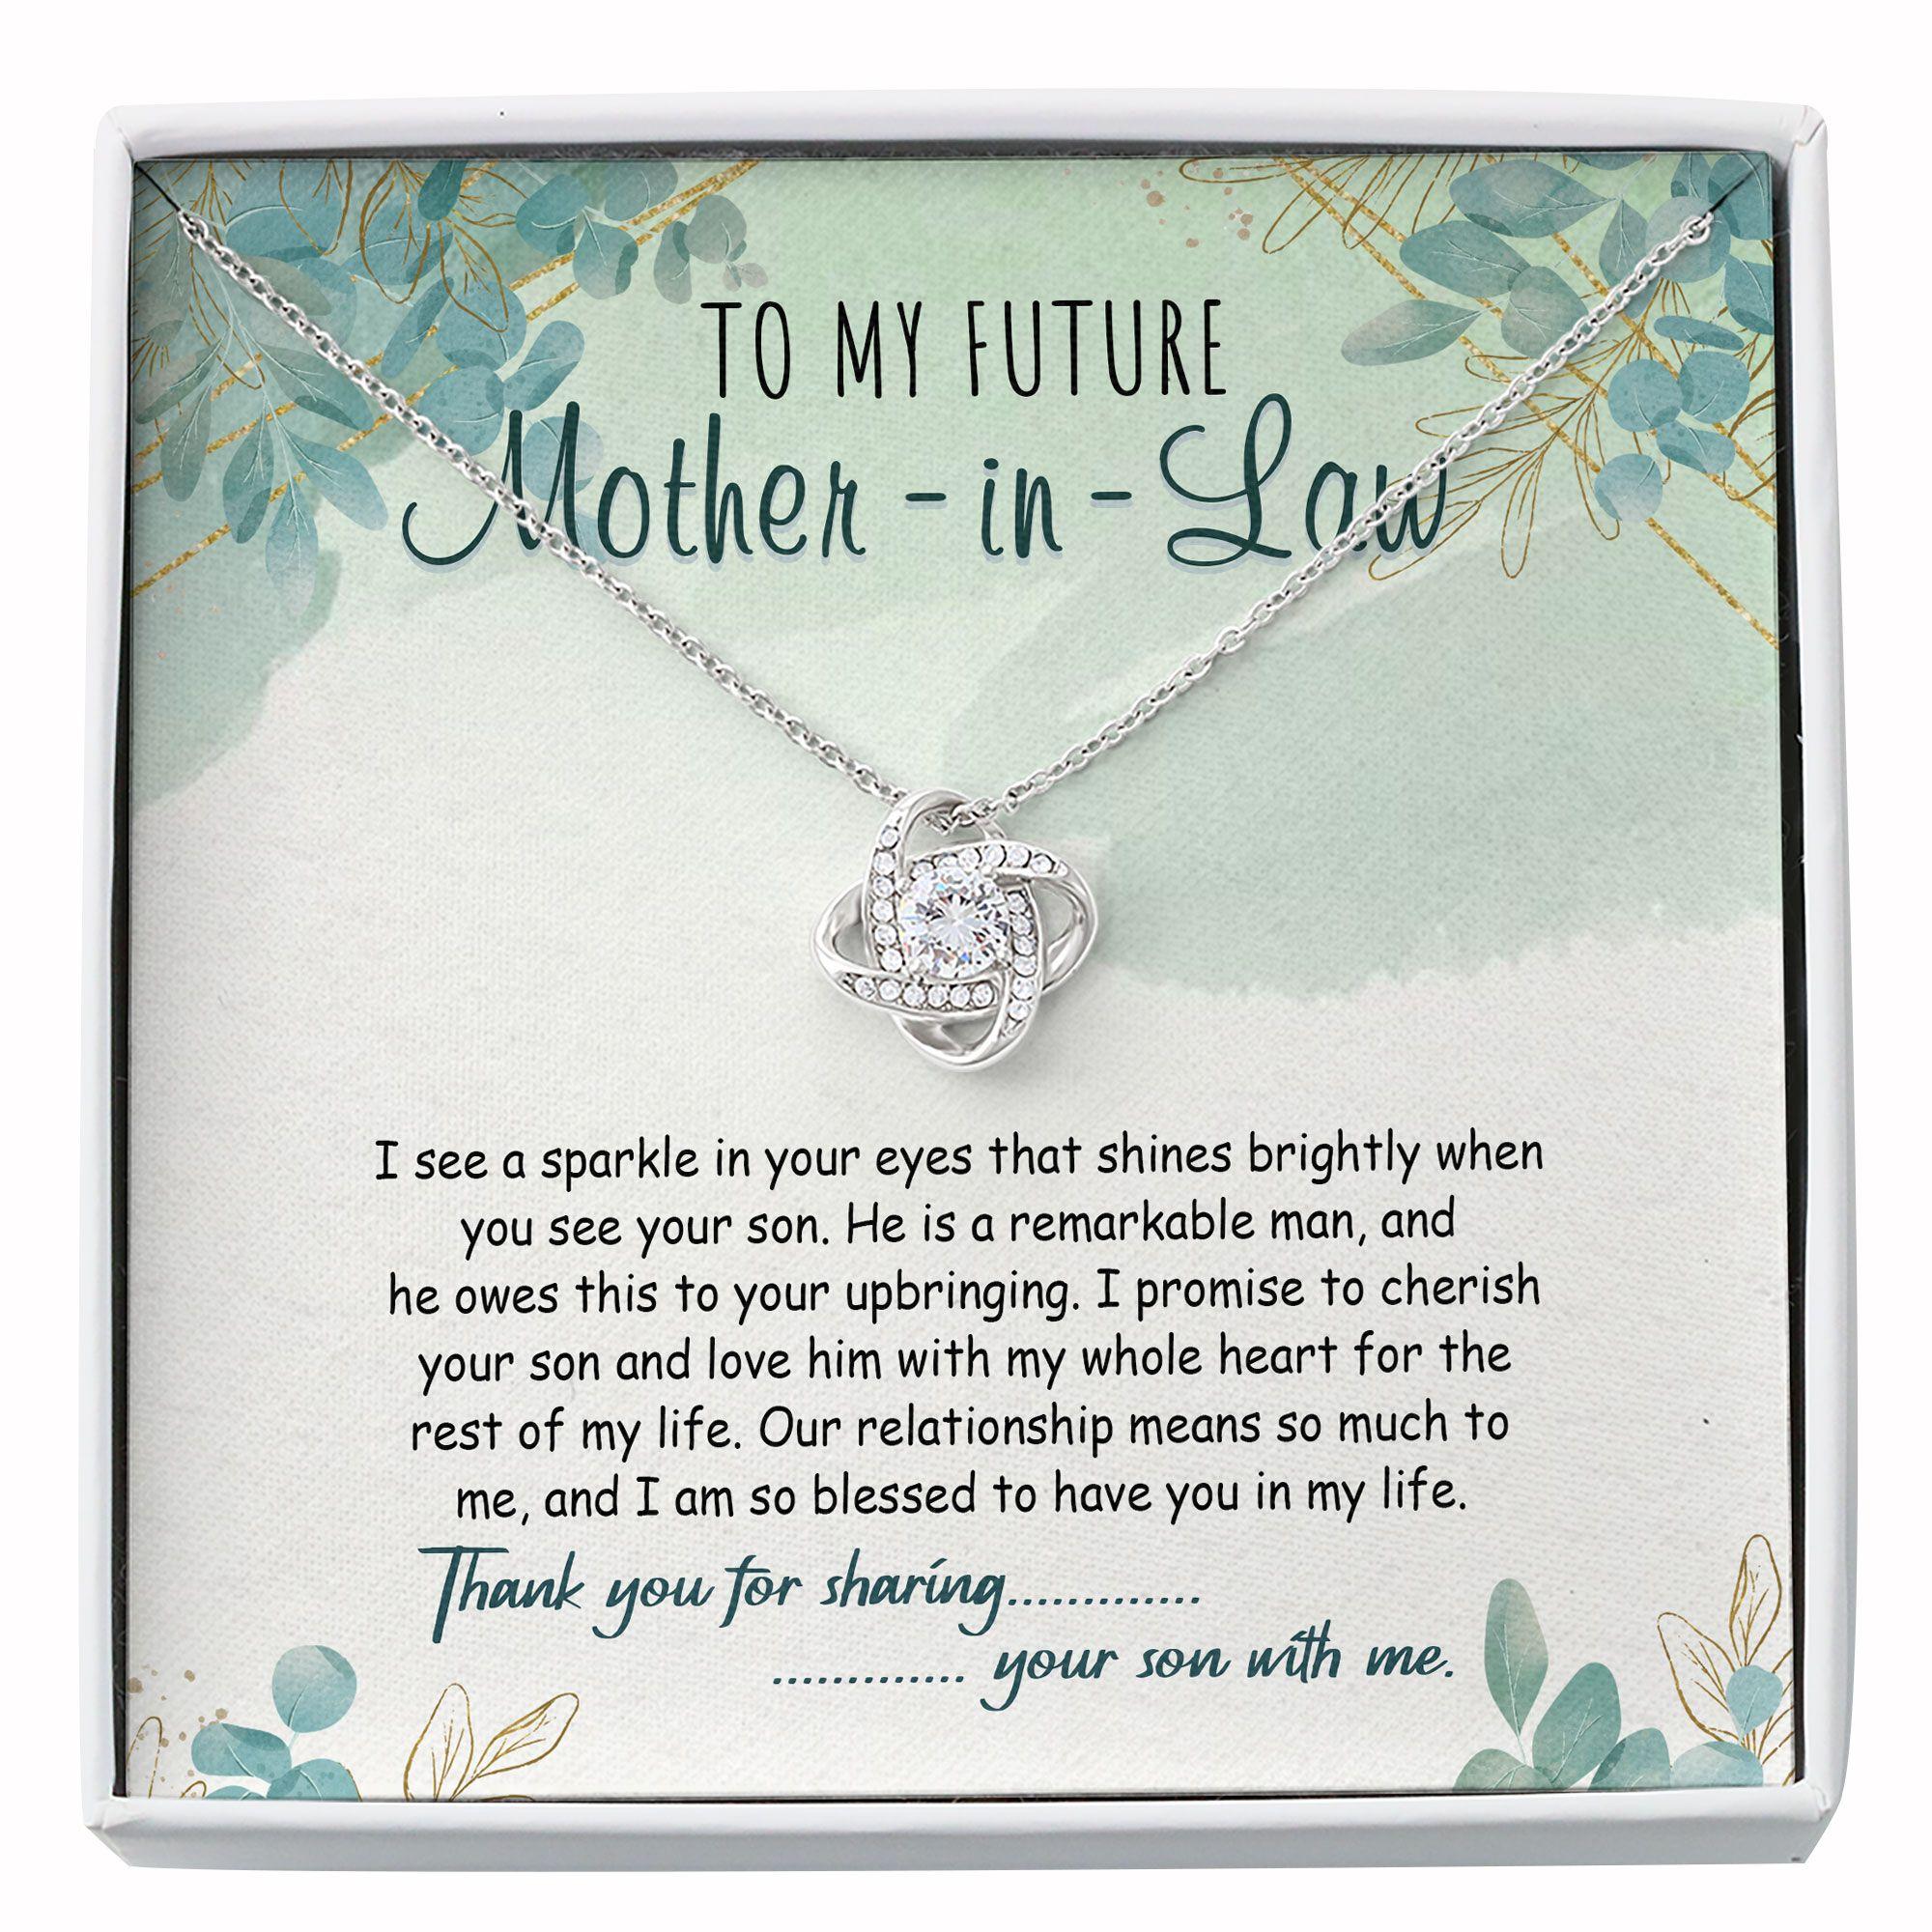 Mother-in-law Necklace, Mother In Law Gift, Future Mother In Law Necklace Wedding Gift, Present For Mother In Law, Love Knot